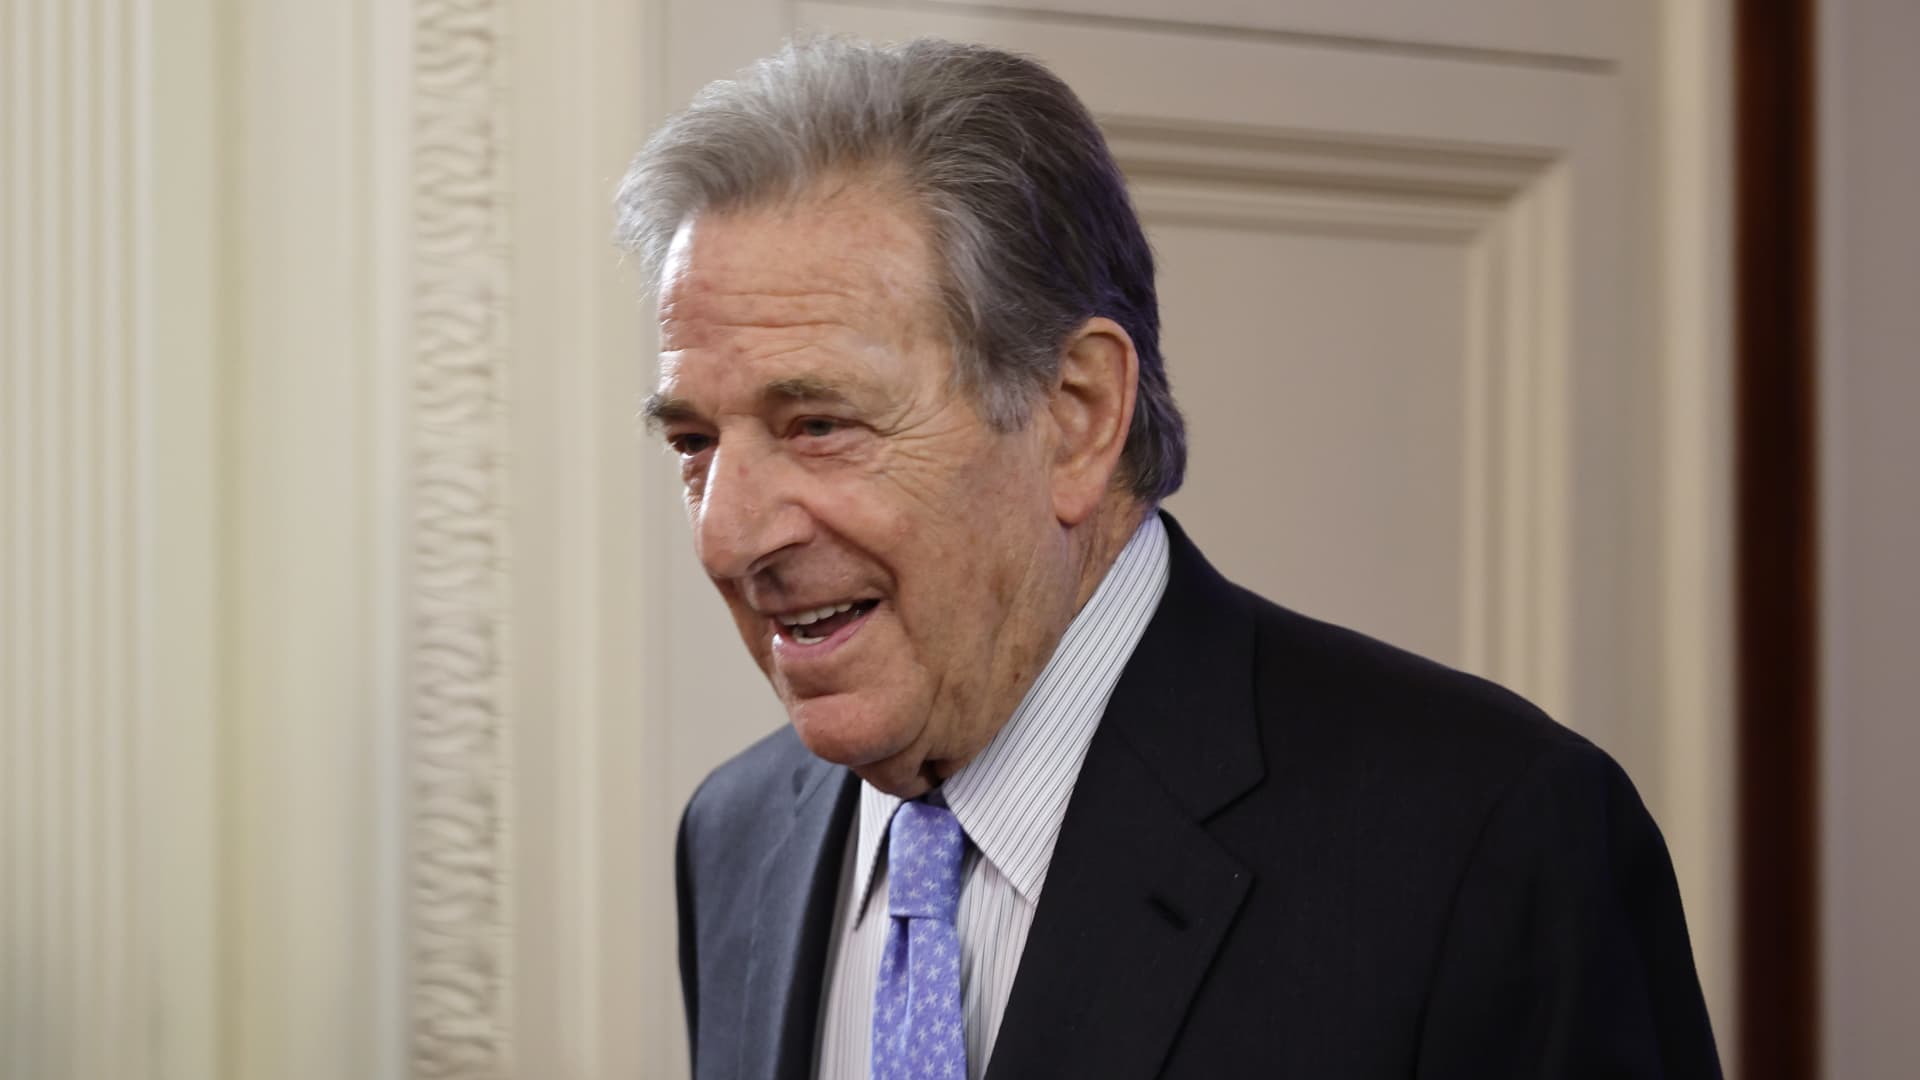 Paul Pelosi, husband of U.S. House Speaker Nancy Pelosi (D-CA), arrives for a reception honoring Greek Prime Minister Kyriakos Mitsotakis and his wife Mareva Mitsotakis in the East Room of the White House on May 16, 2022 in Washington, DC.